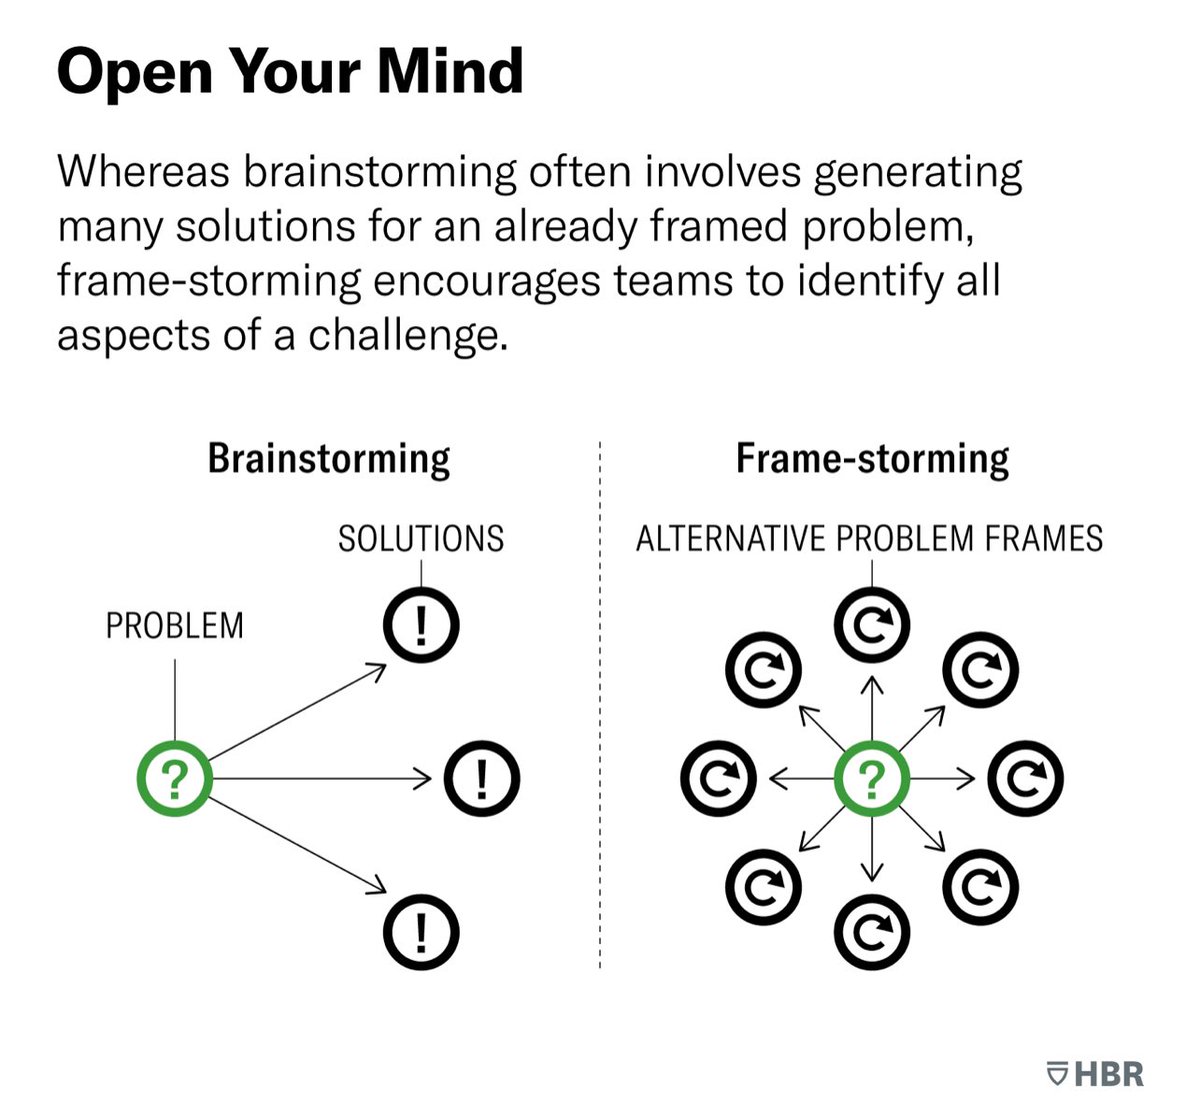 #OpenYourMind. #InviteYourMind. #FreeYourMind. #IgniteYourMind.

Mentally do it. Redouble your mind’s commitment to #metacognition’s roles for sustaining alertness to ways you are thinking—and readiness to pivot to #rethink things through to best outcomes.